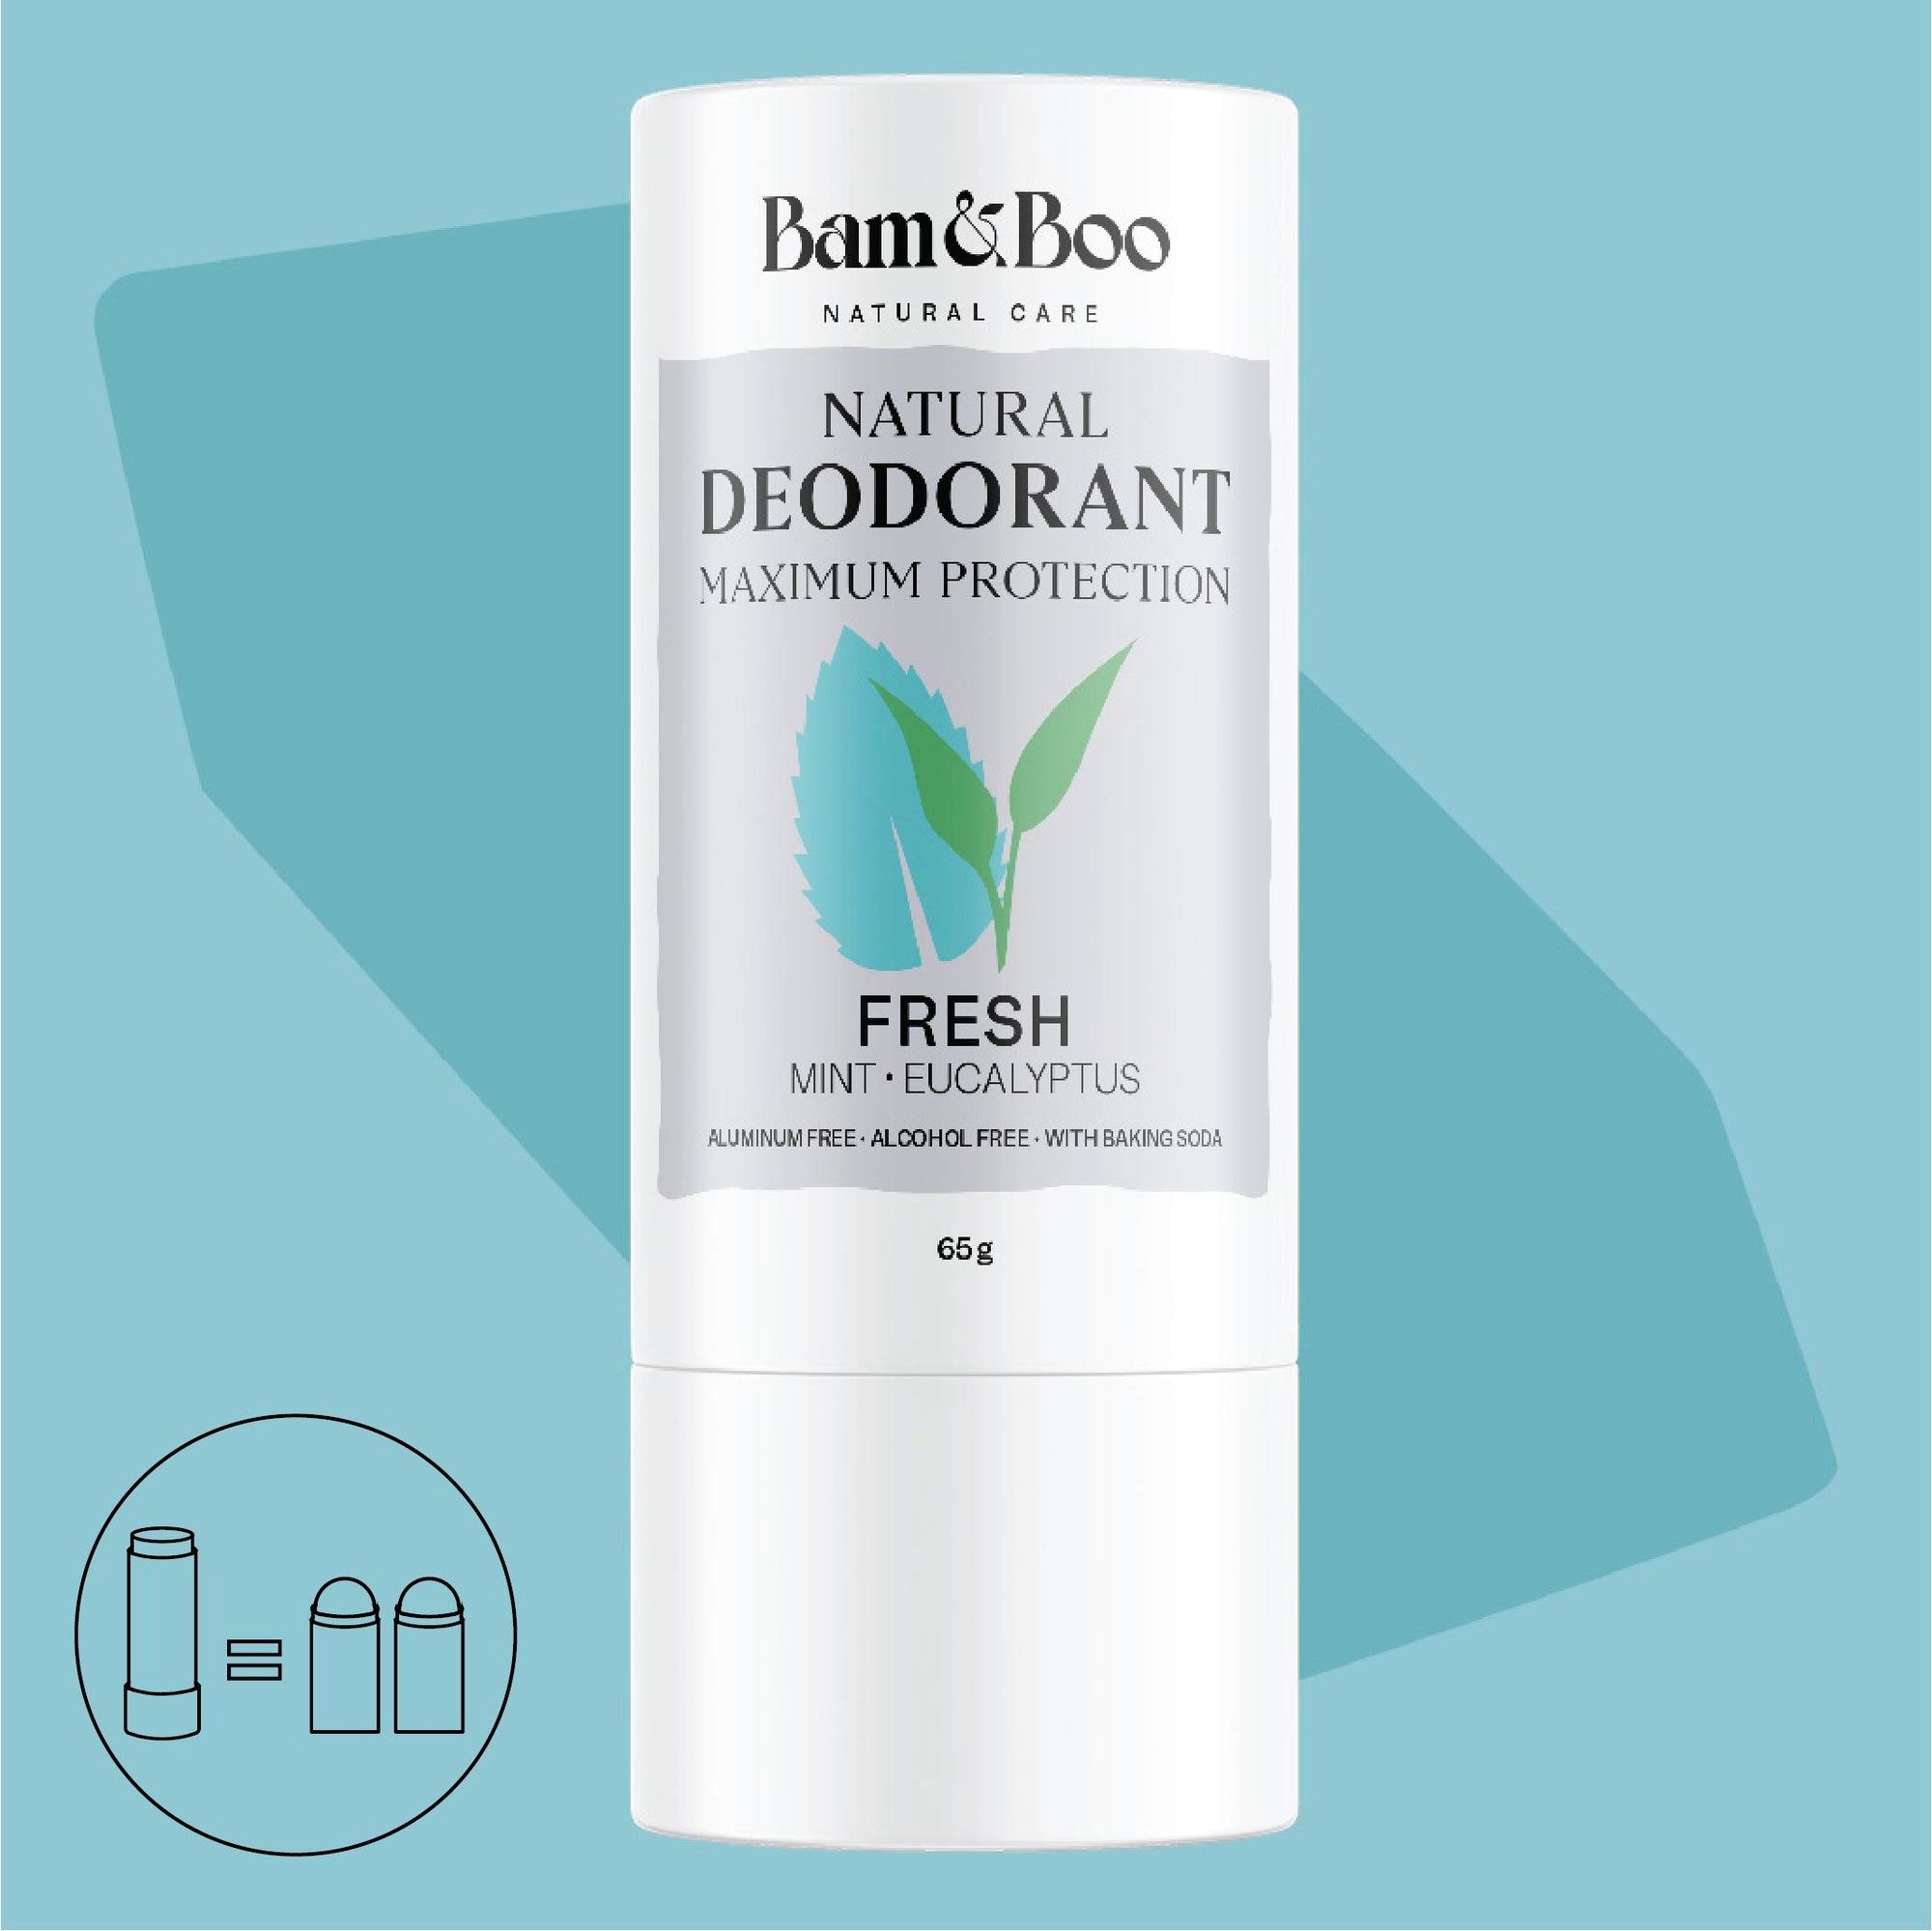 NATURAL DEODORANT | MAXIMUM PROTECTION | Fresh - Mint & Eucalyptus - Bam&Boo - Eco-friendly, vegan, sustainable oral and personal care